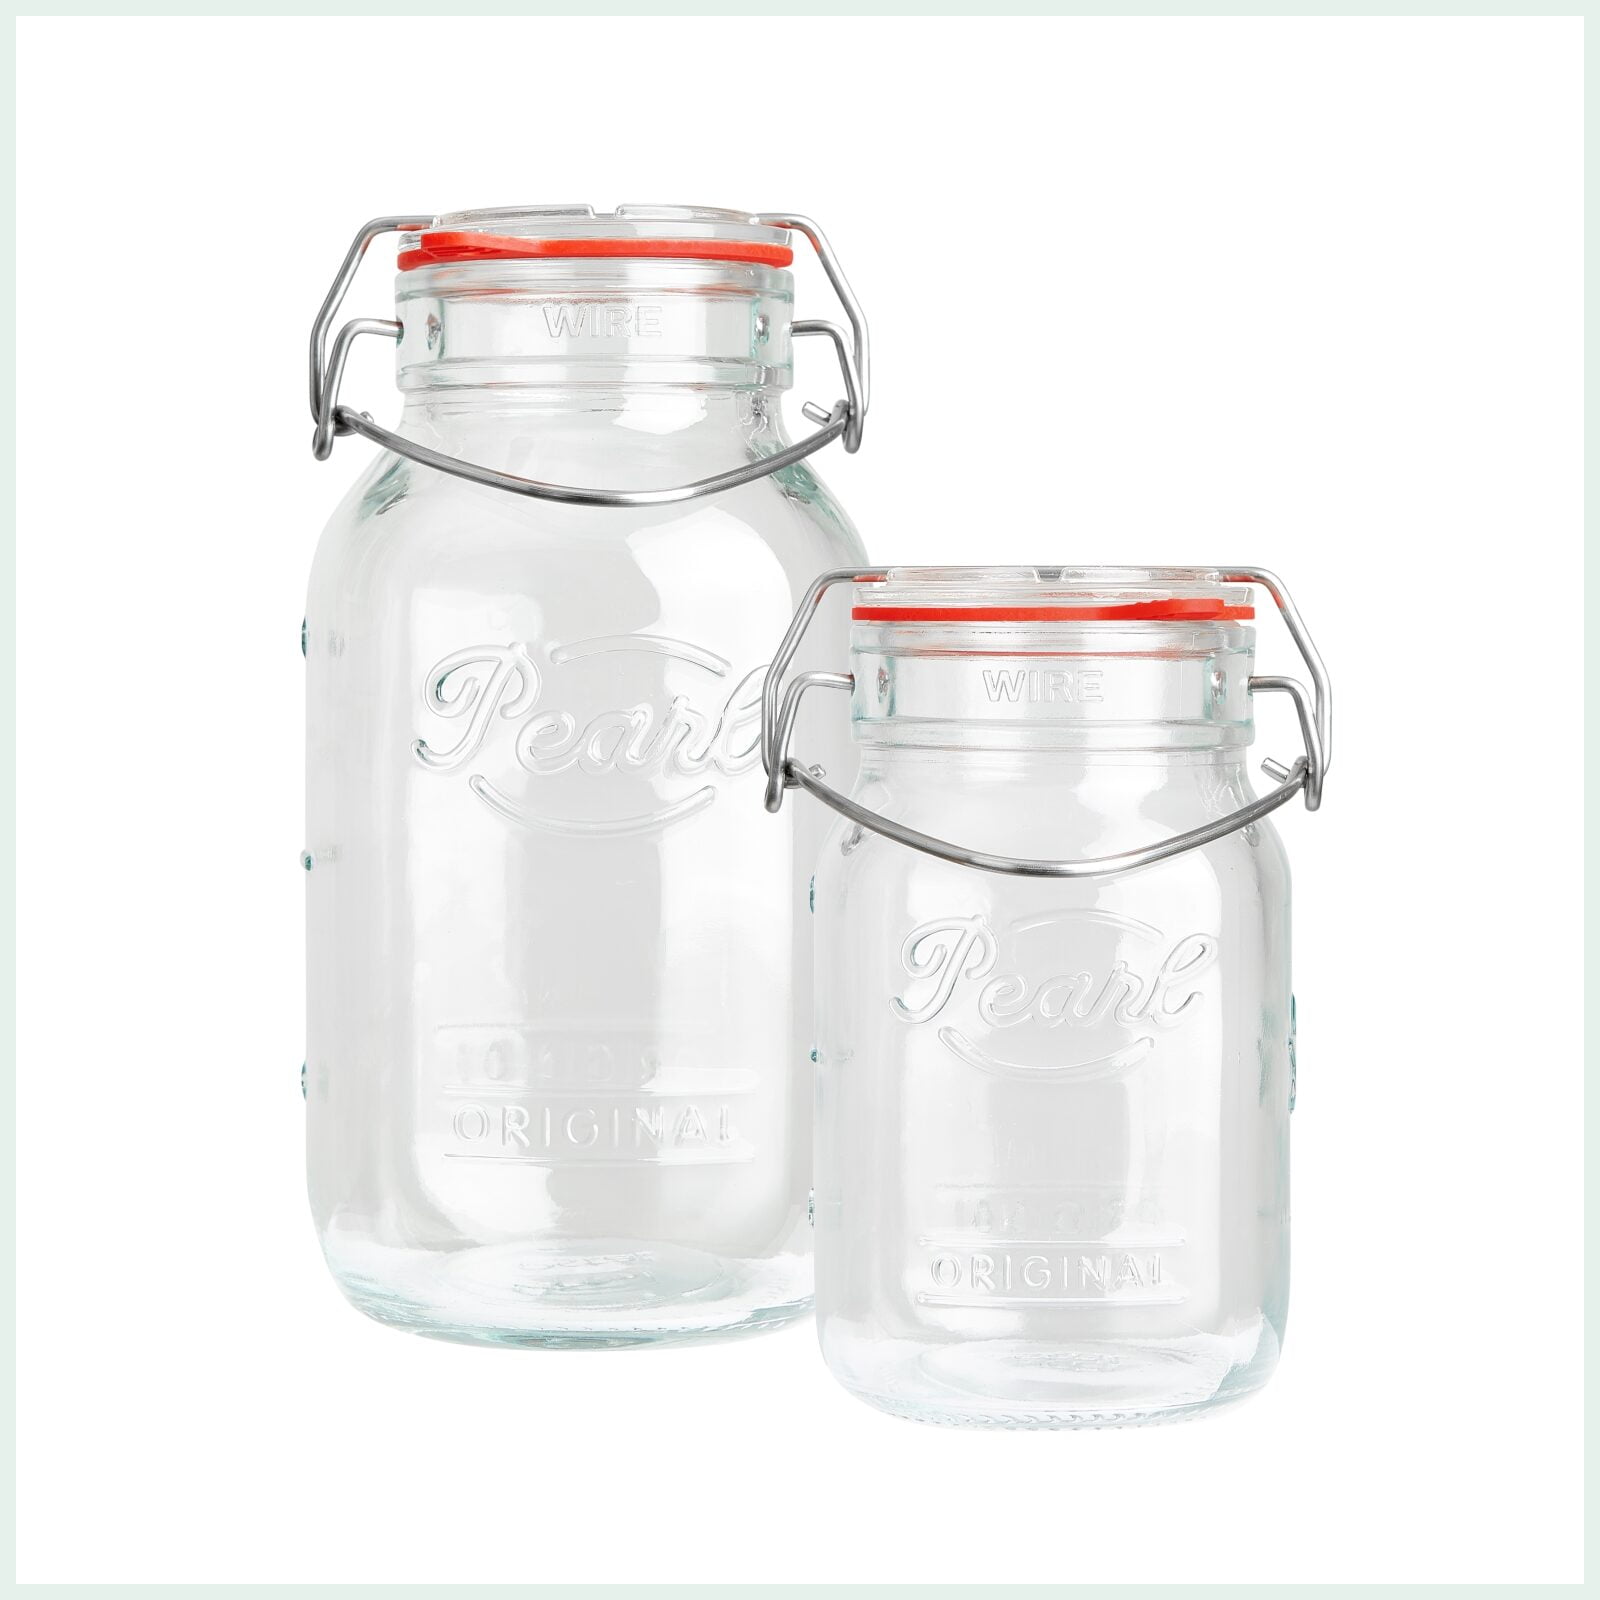 Pearl Mariposa preserving and canning jars